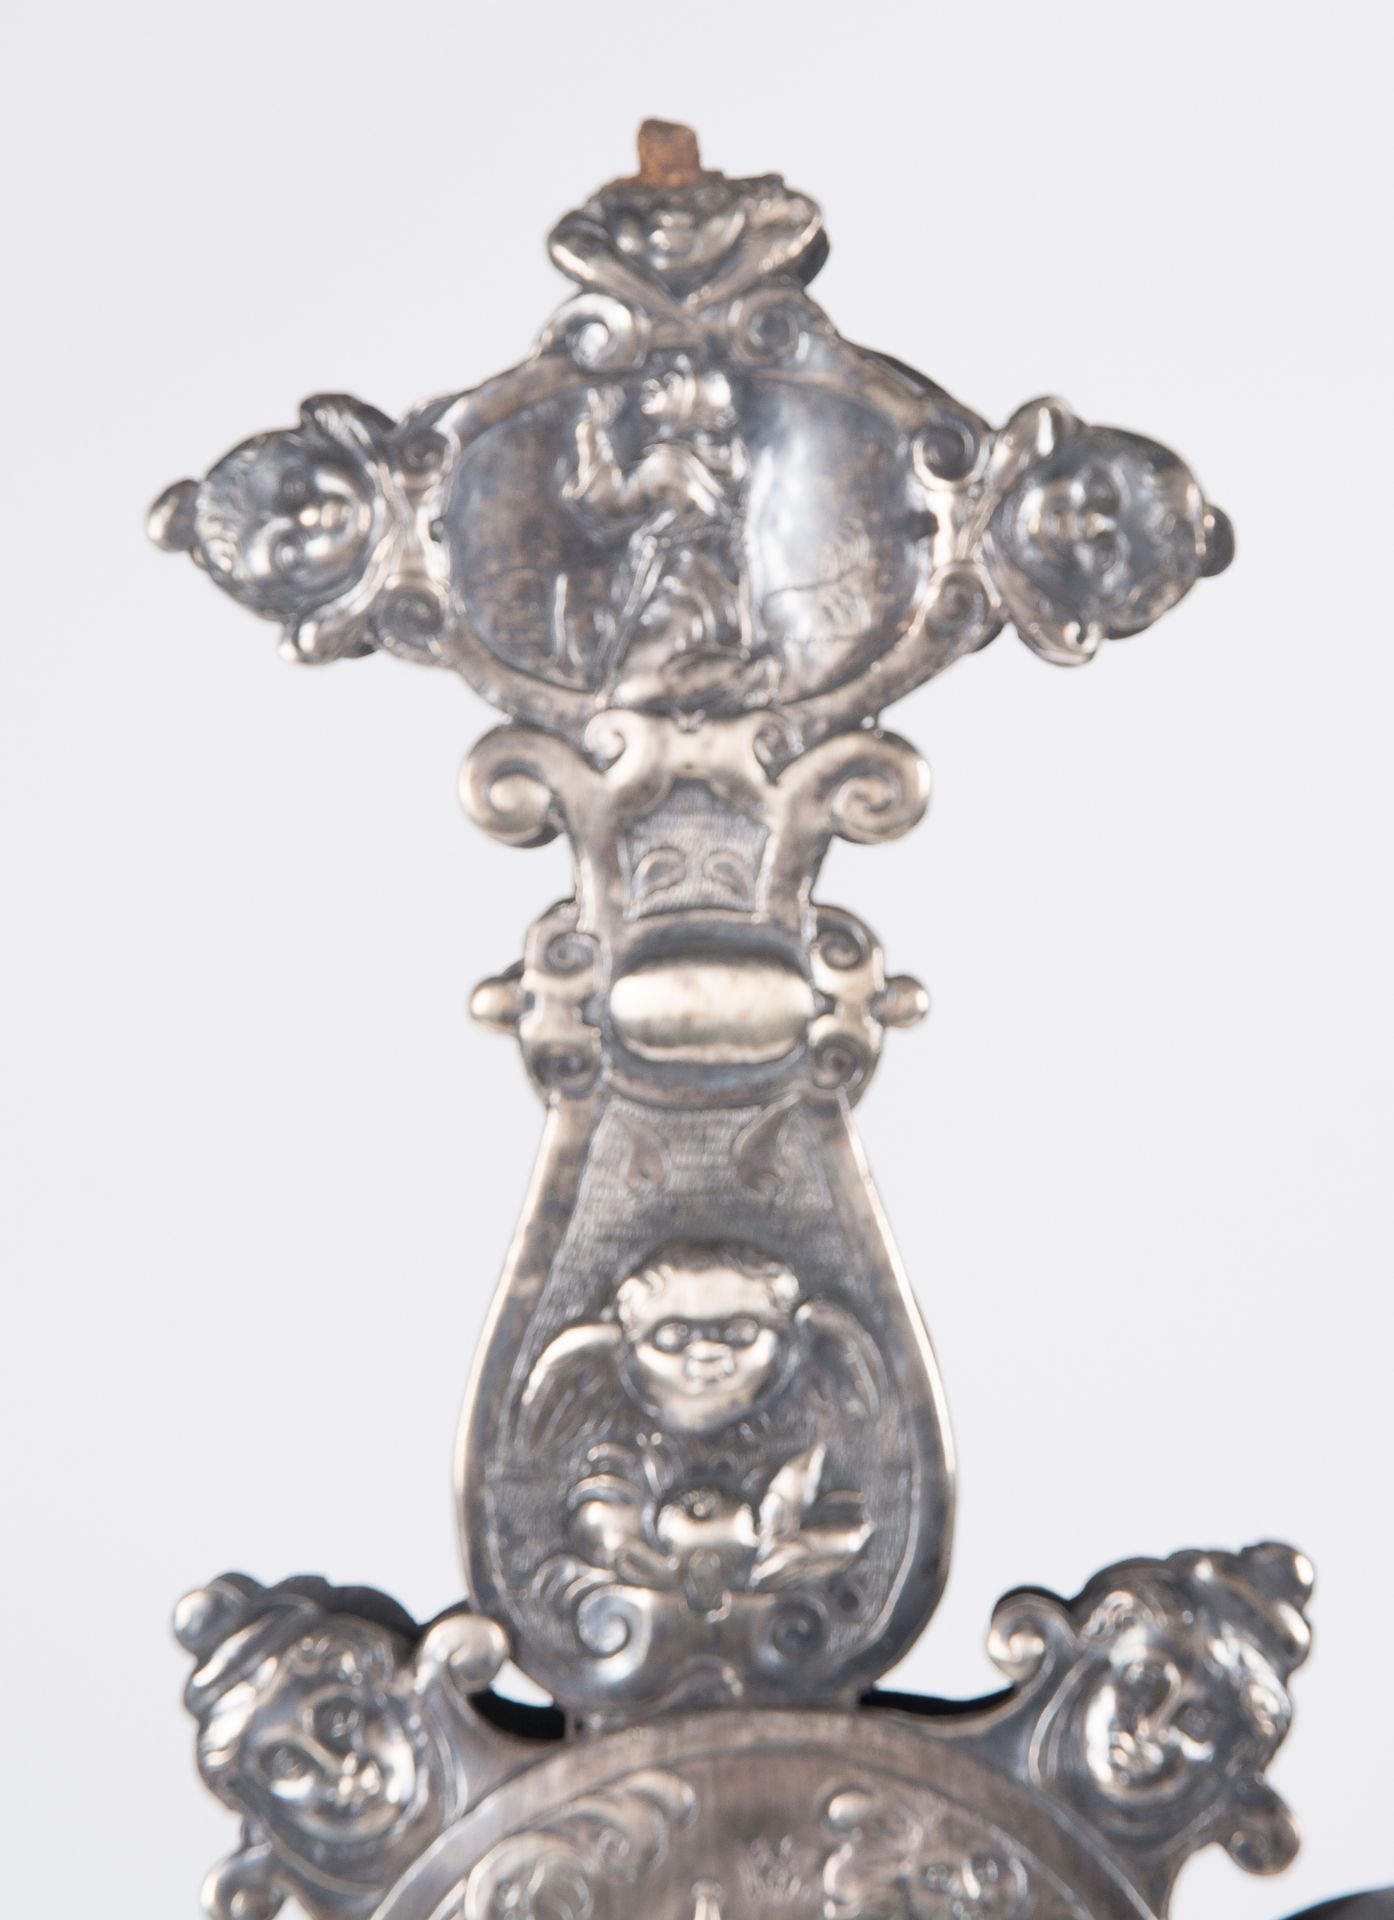 Large, chased silver processional cross. 16th century. - Image 11 of 14